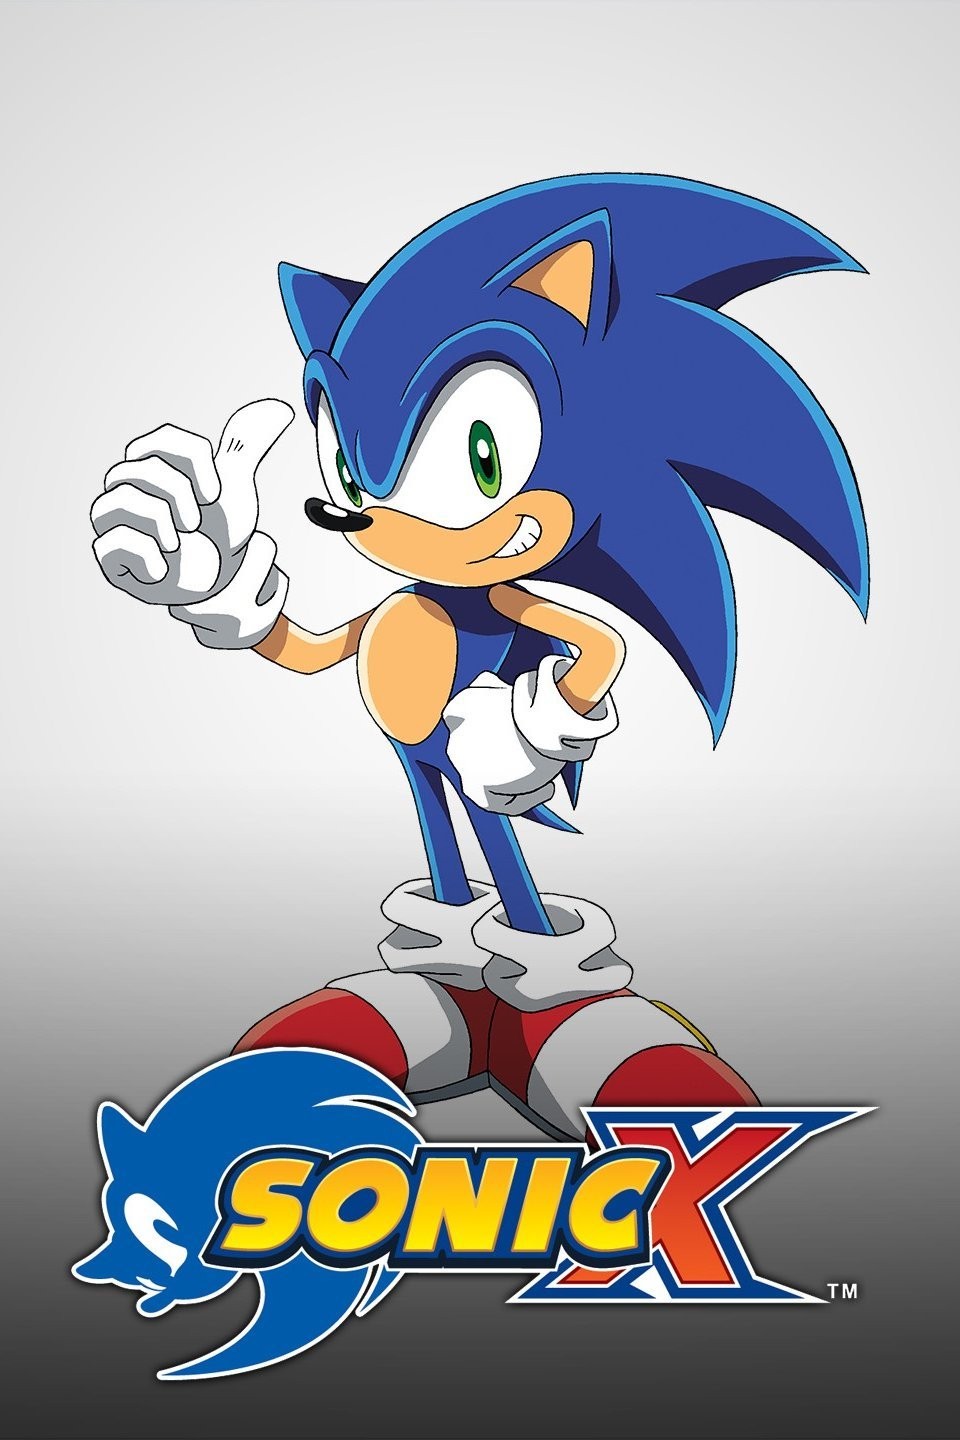 SONIC 3 HYPE — A new Sonic 2 poster has been released SOURCE